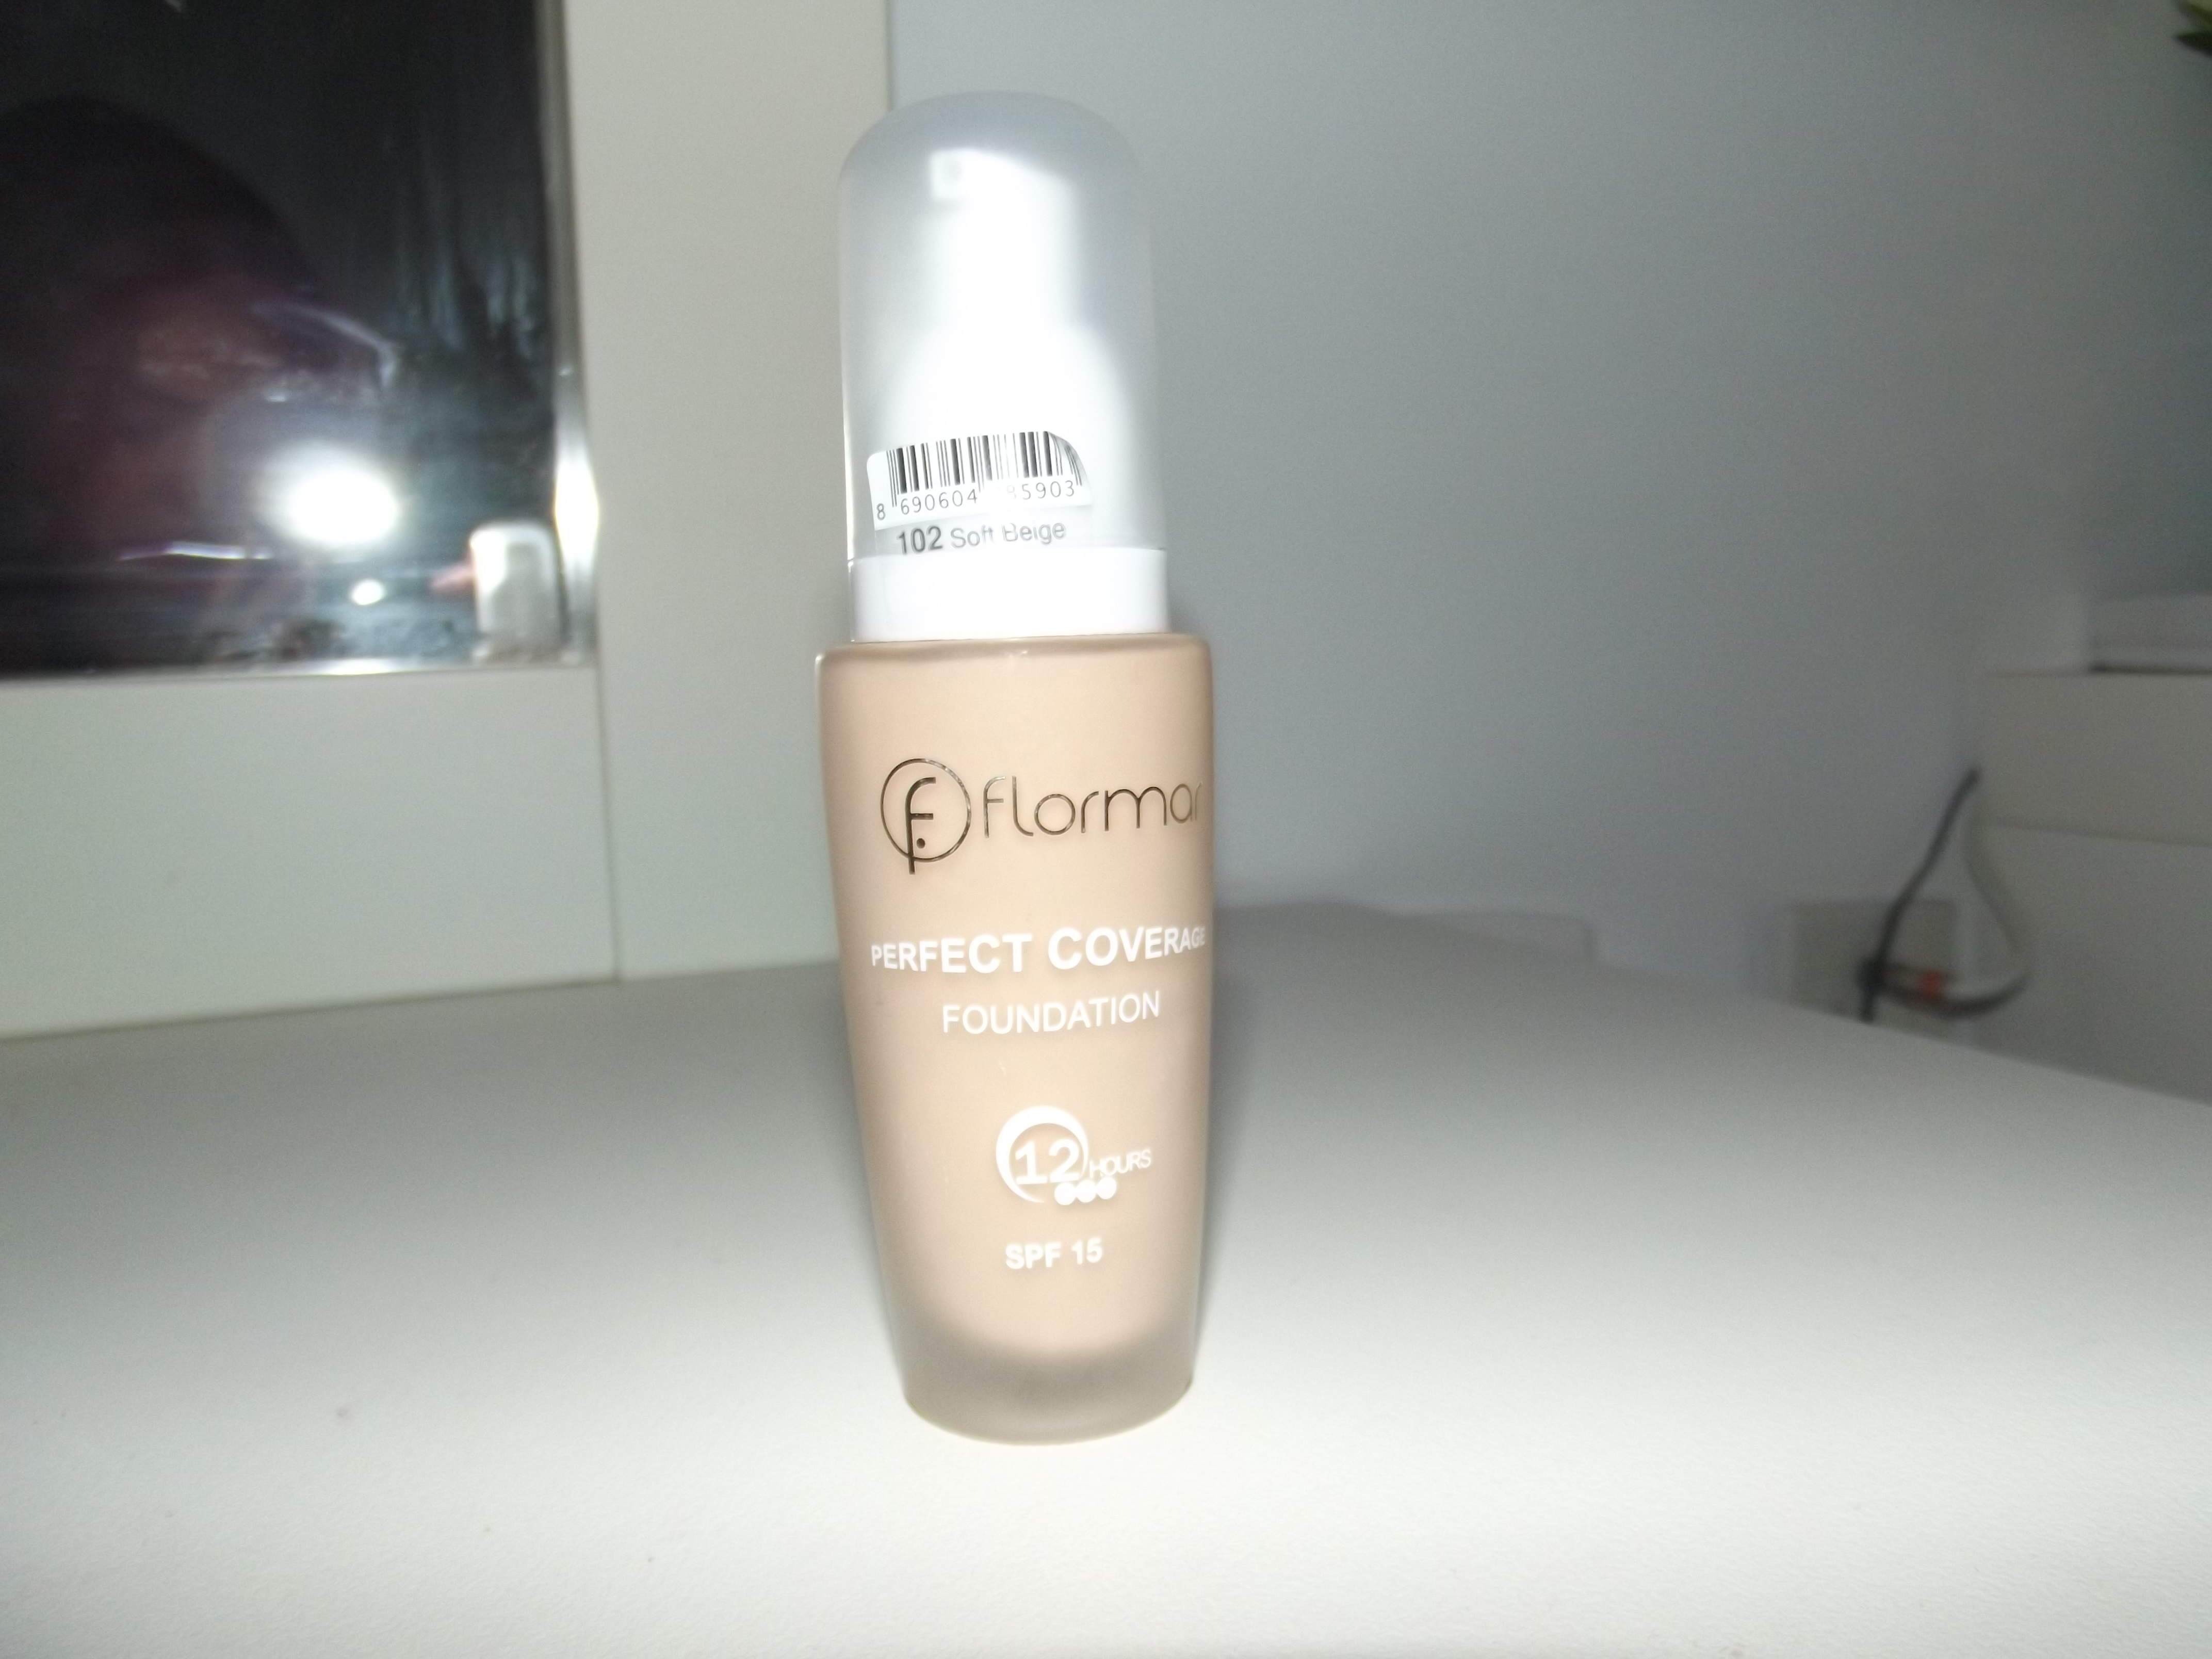 FLEEK - ✨FLORMAR PERFECT COVERAGE CONCEALER REVIEW✨ I recently